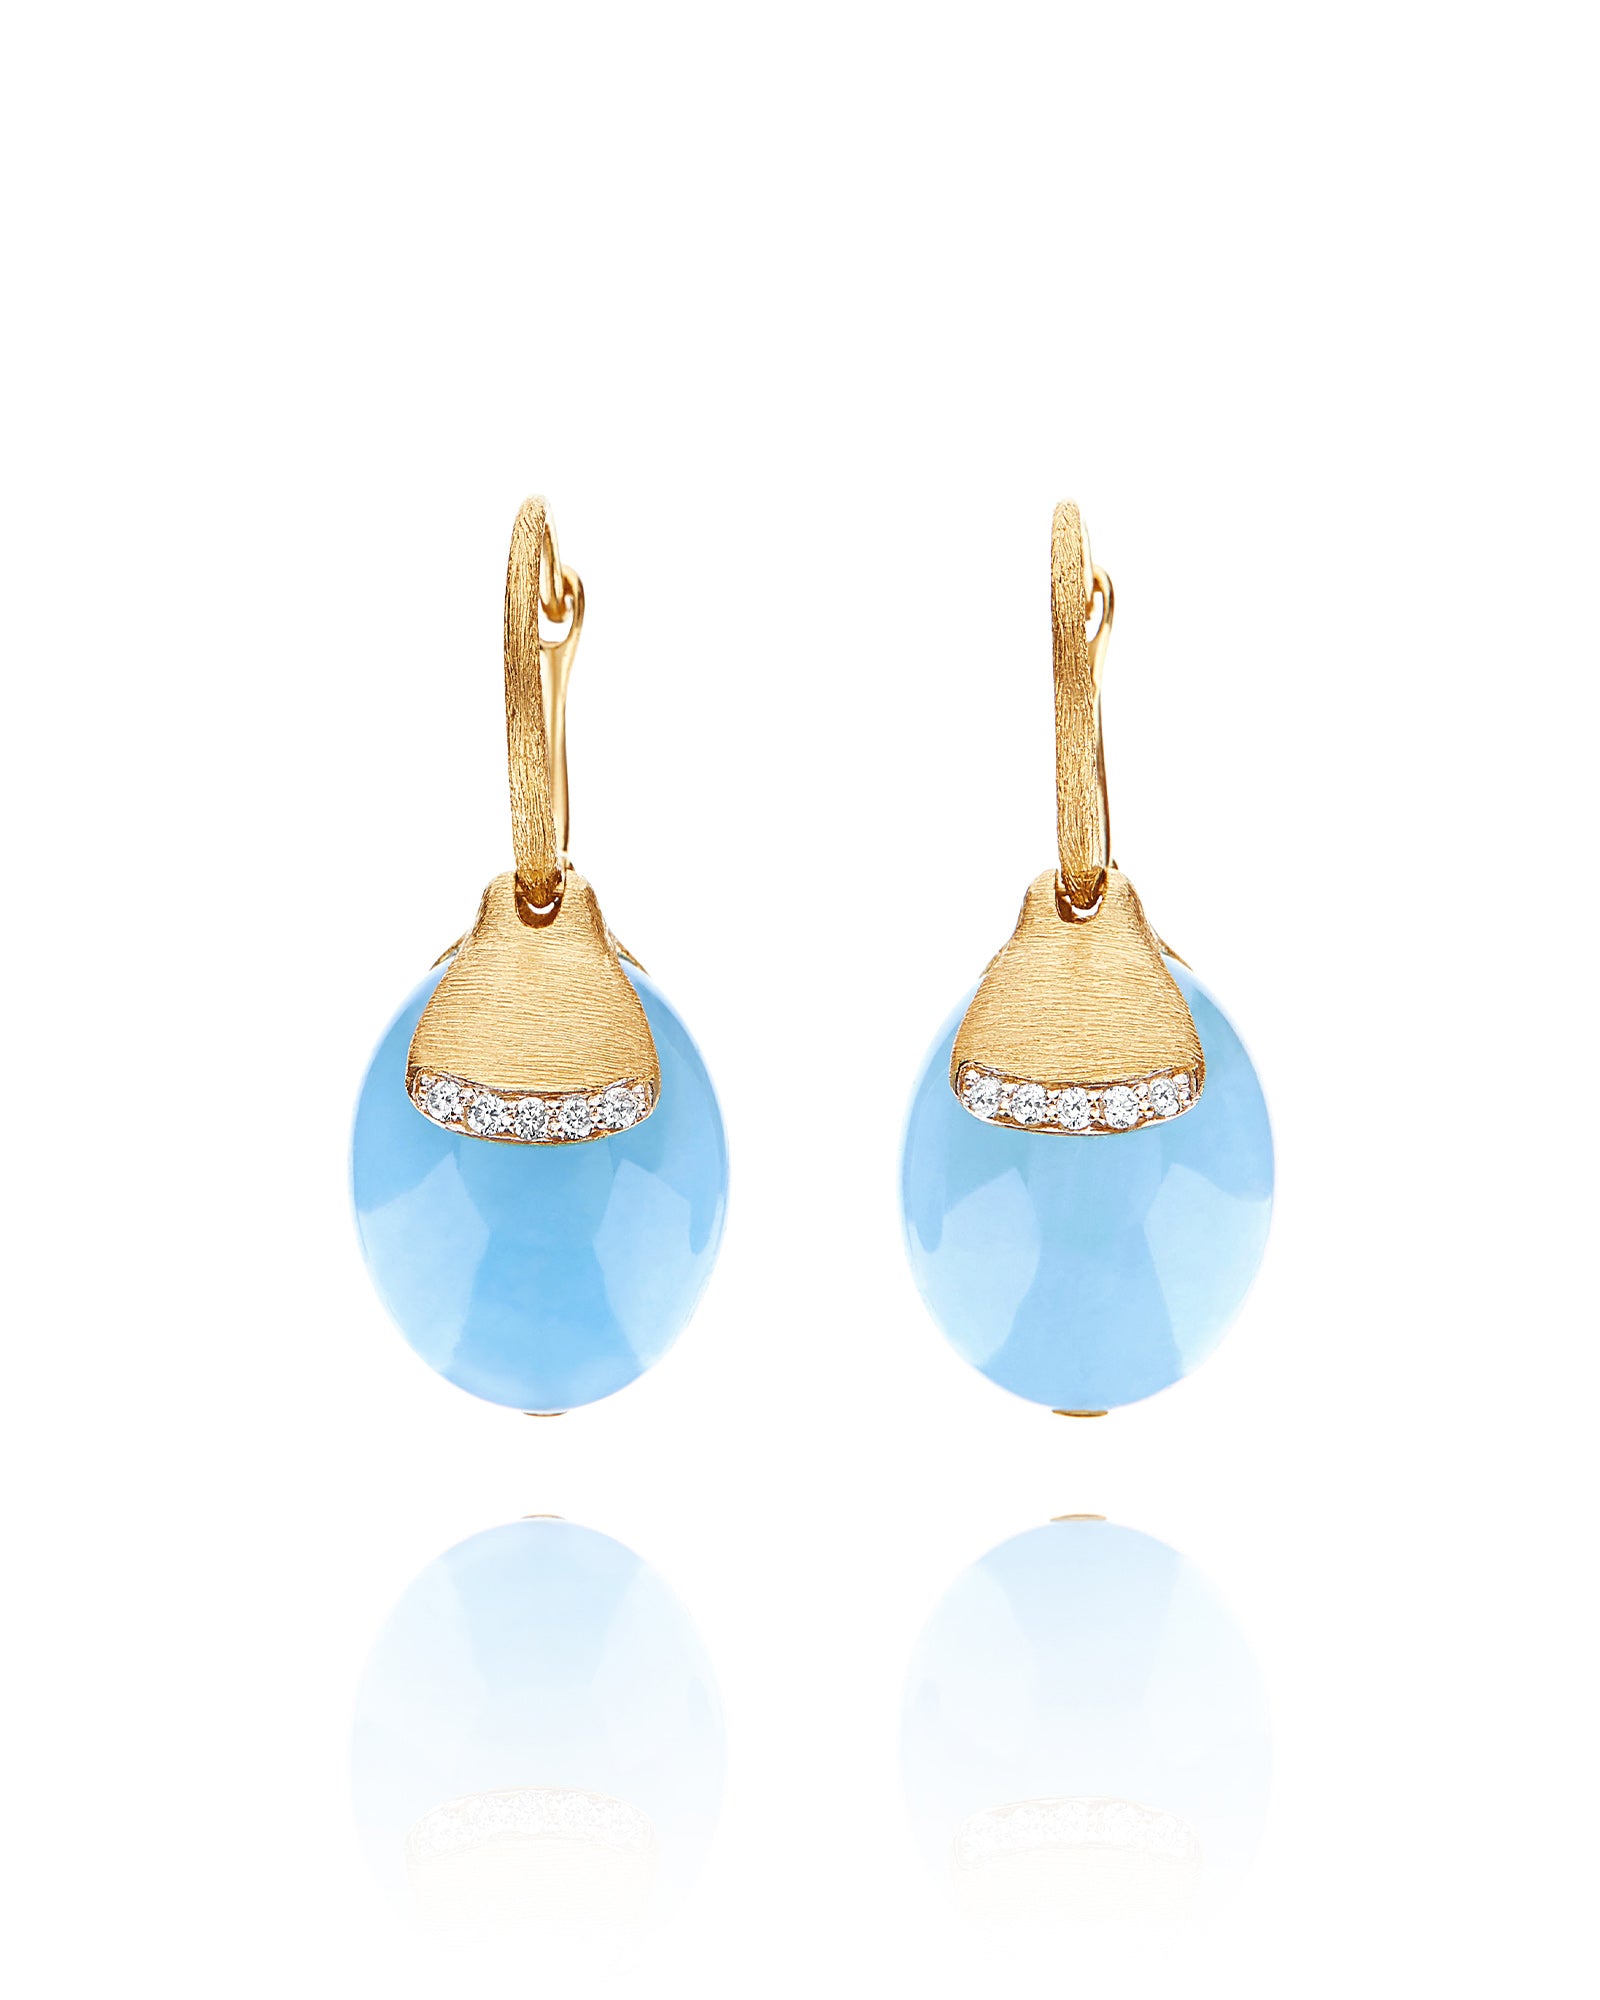 Nanis AZURE "AMULETS" CILIEGINE GOLD AND MILKY AQUAMARINE BALL DROP EARRINGS WITH DIAMONDS DETAILS (LARGE) OS16-587